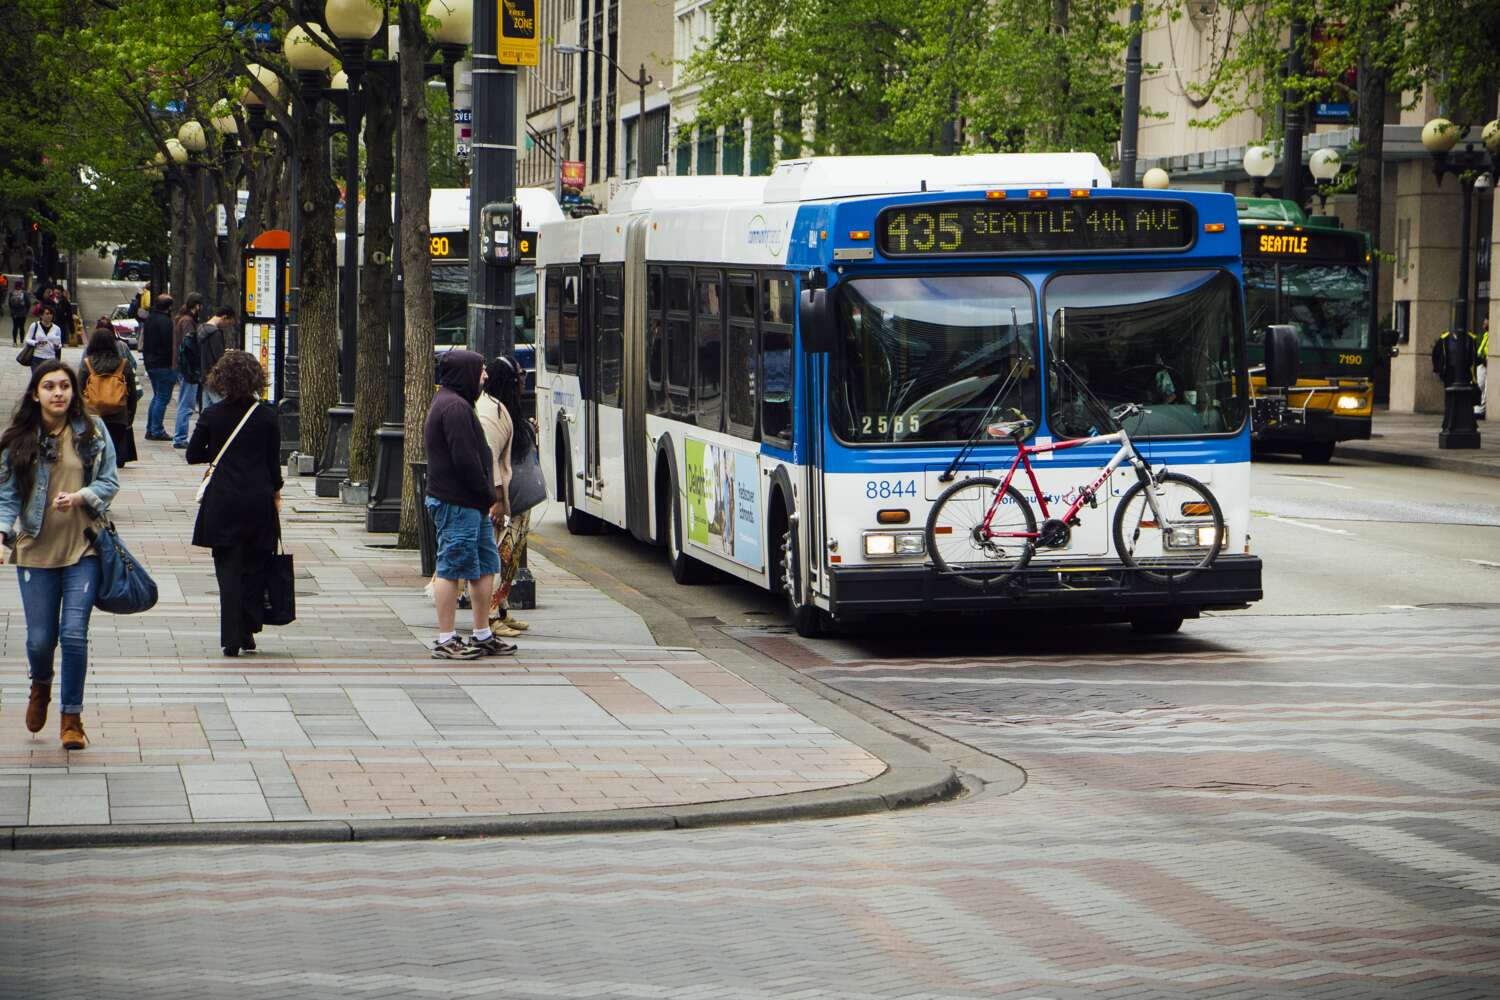 Image of Community Transit bus stopping for pedestrians